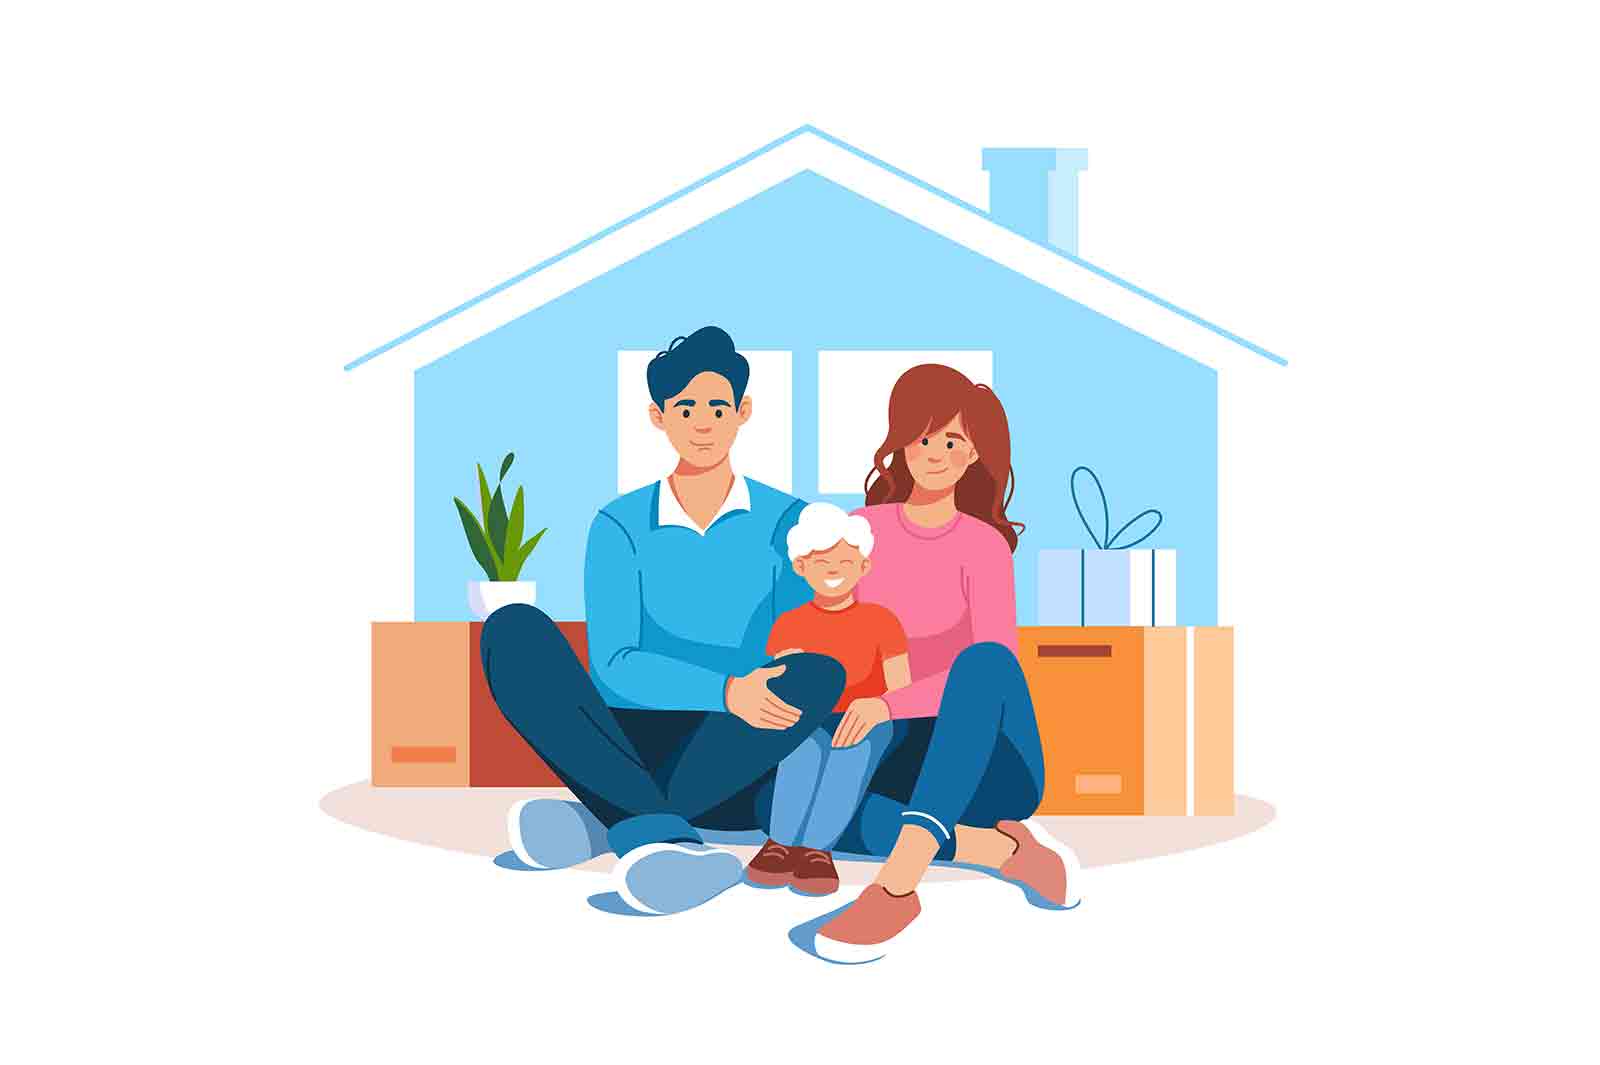 Happy friendly family sitting together at home vector illustration. Smiling mother, father and son flat style concept